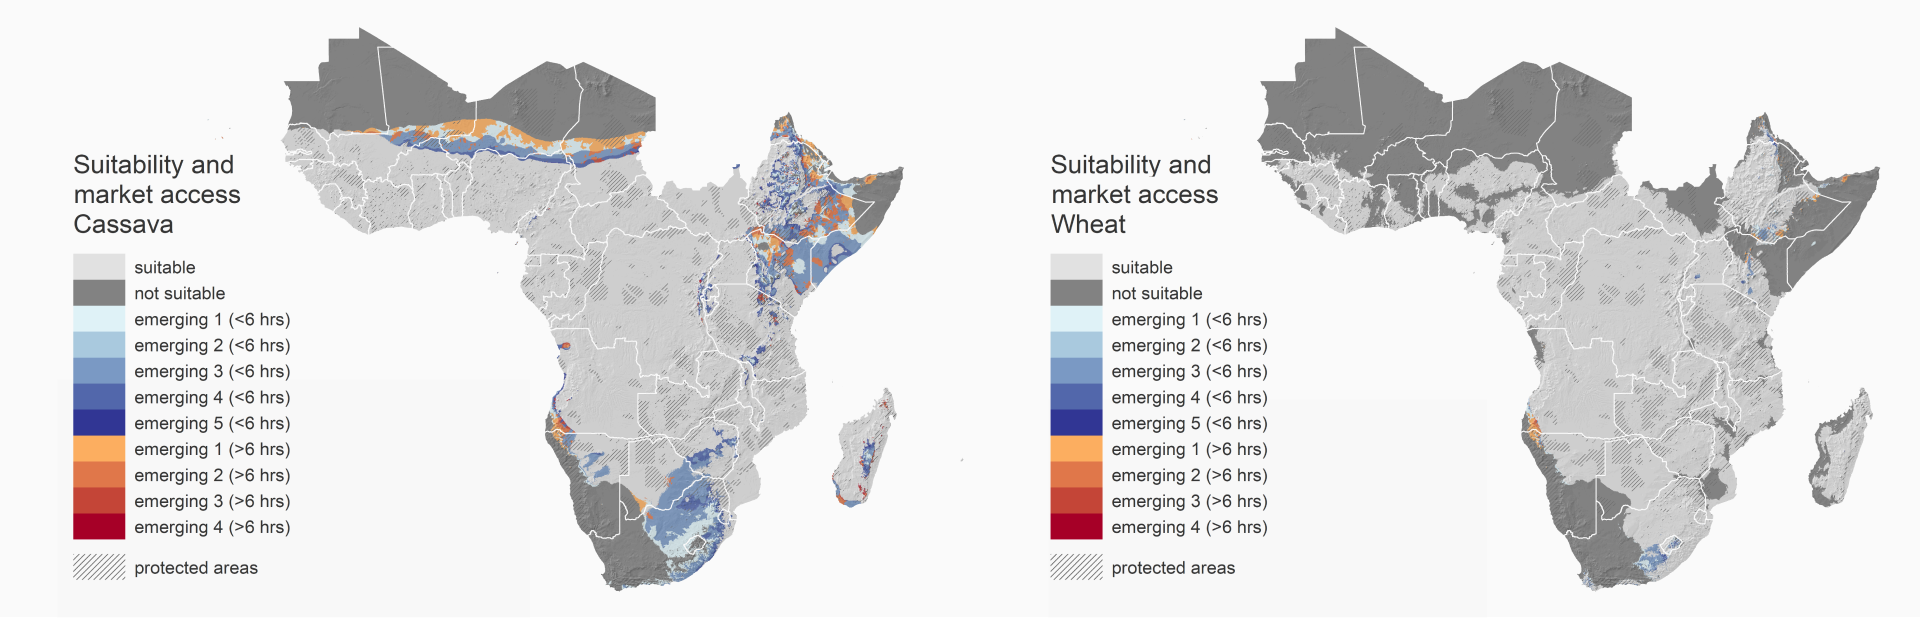 Data Insight 7, Maps 2, 3: Suitability and market access of cassava, wheat